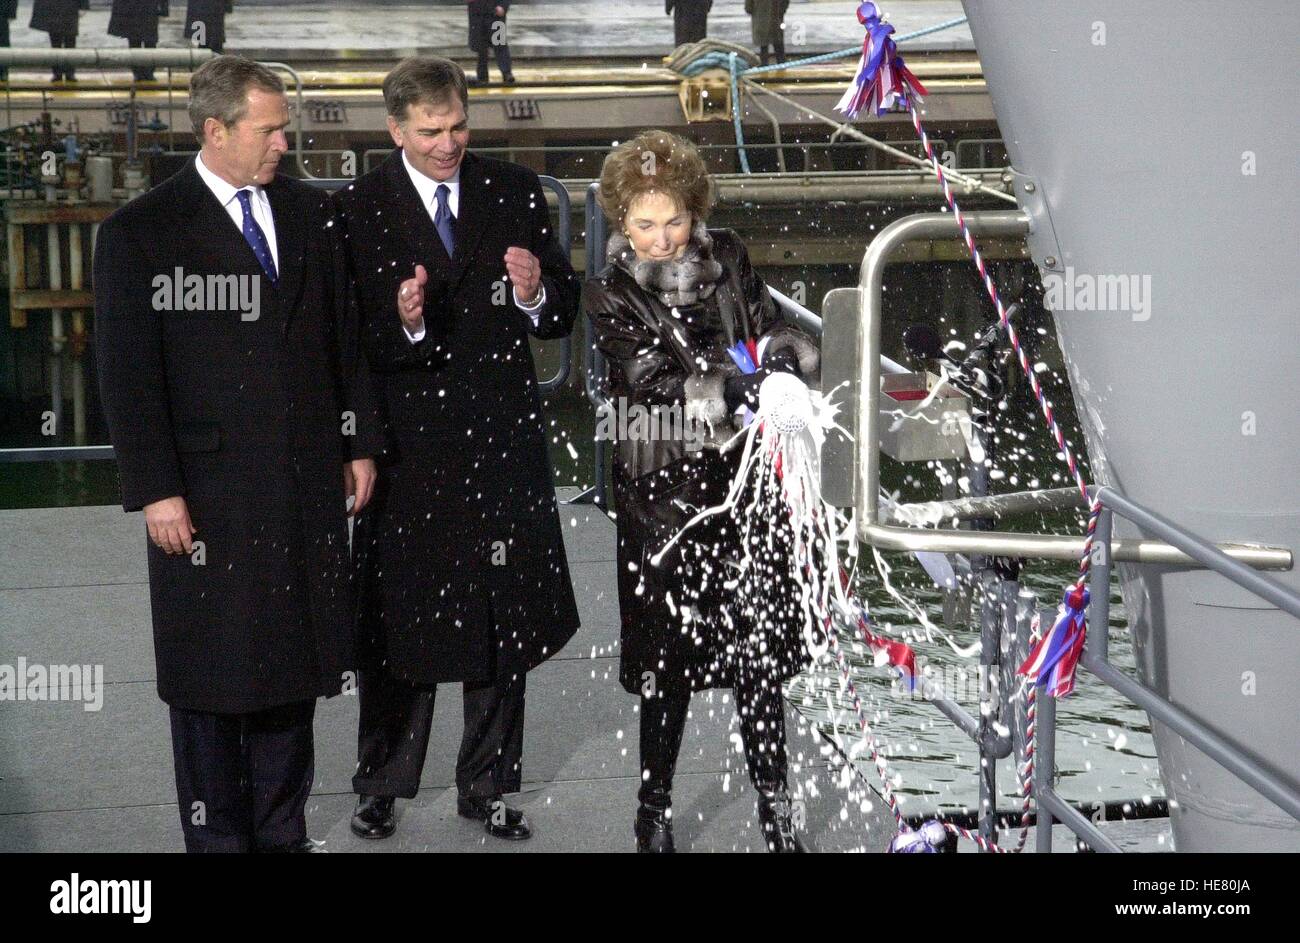 U.S. President George W. Bush and Newport News Shipbuilding President and CEO William Frick watch former First Lady Nancy Reagan christen the new USN Nimitz-class nuclear-powered aircraft carrier USS Ronald Reagan at the Northrop Grumman Newport News Shipbuilding facility March 4, 2001 in Newport News, Virginia. Stock Photo